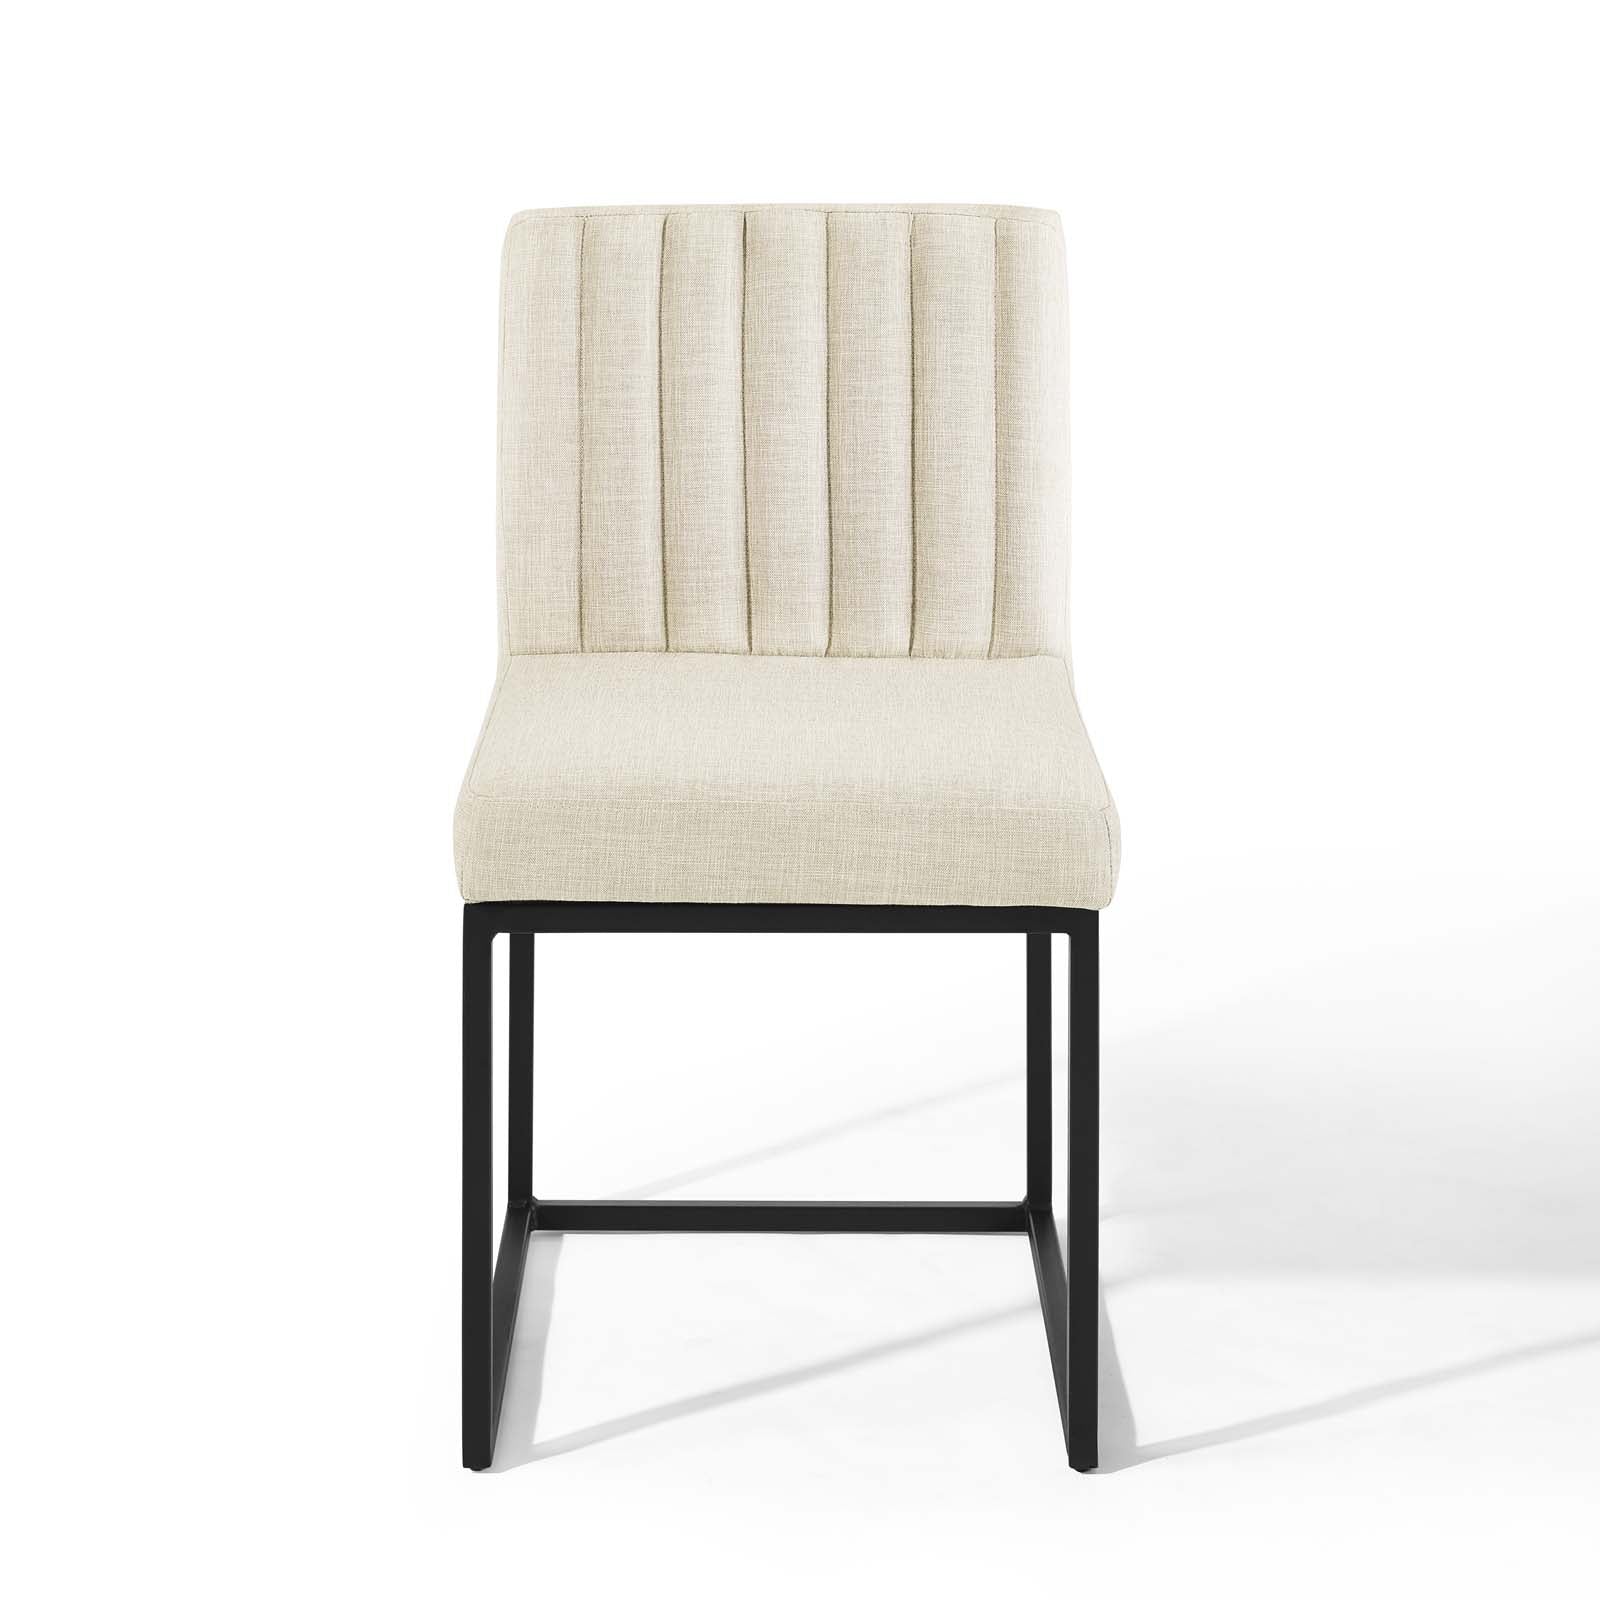 Carriage Fabric Dining Chair- Beige